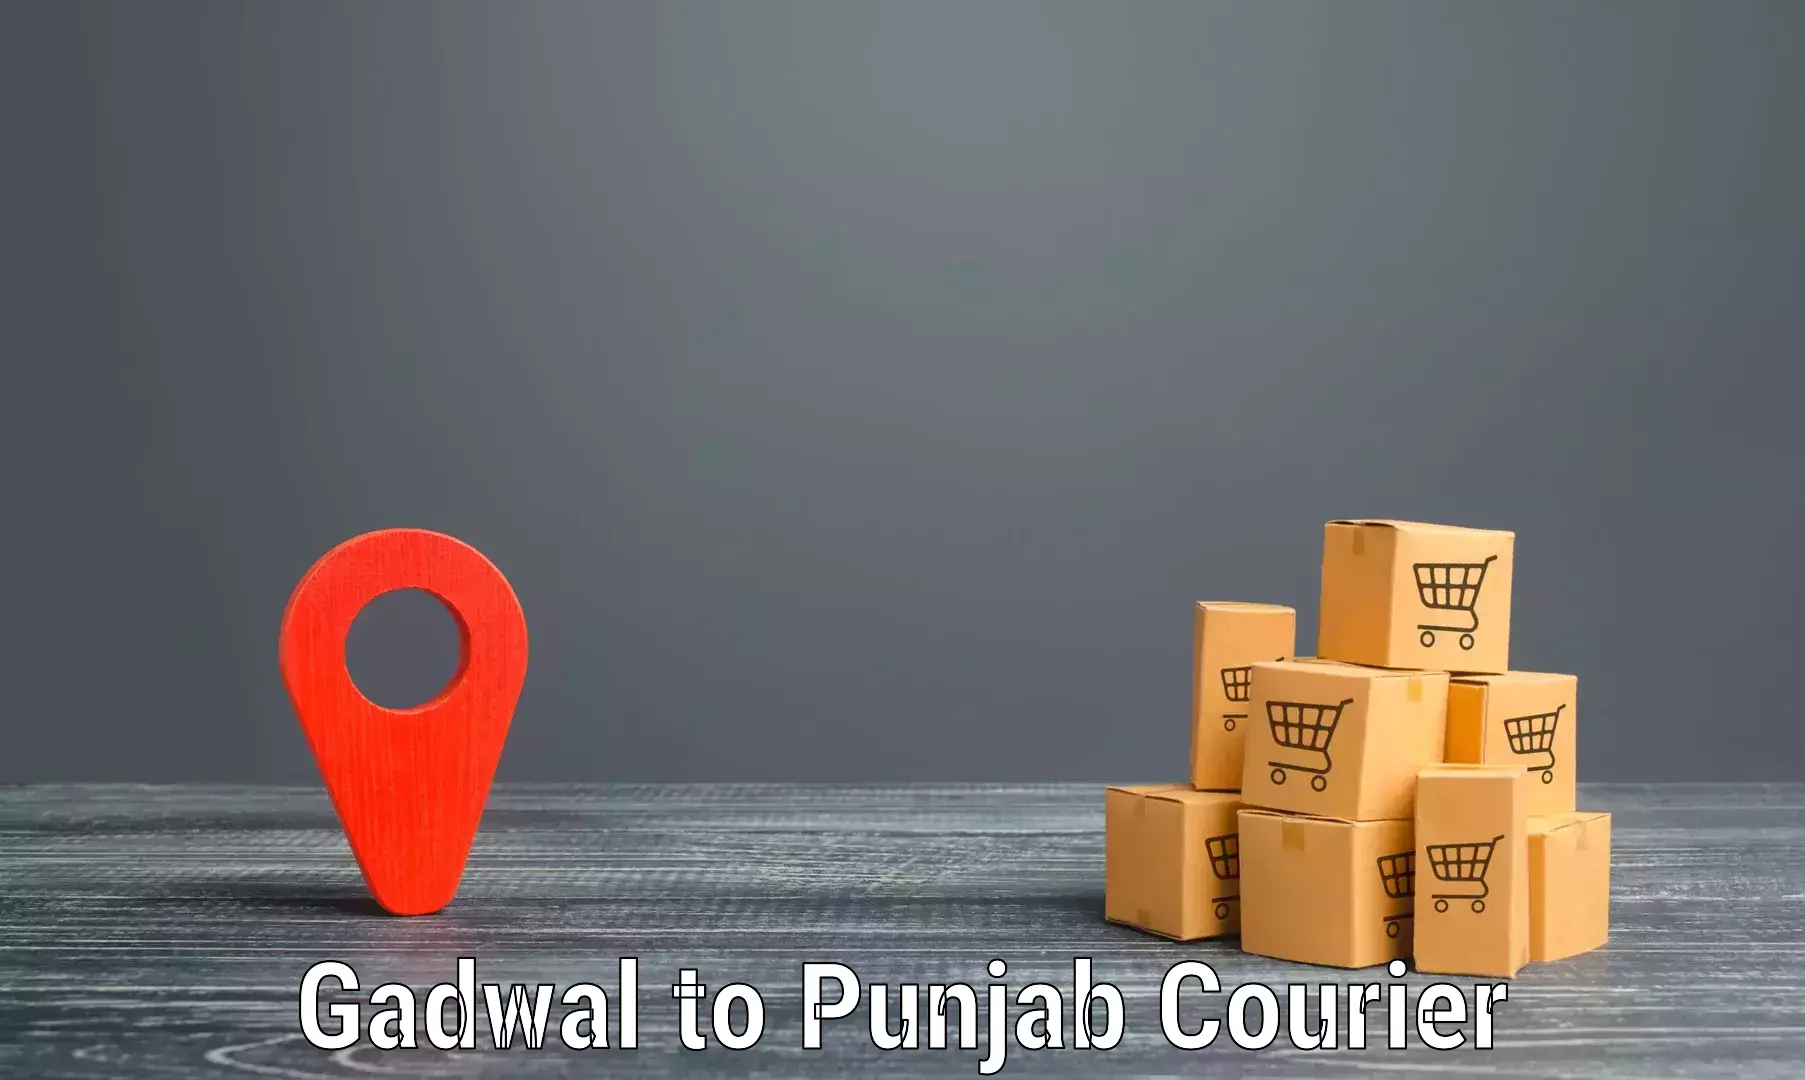 Reliable courier service Gadwal to Anandpur Sahib